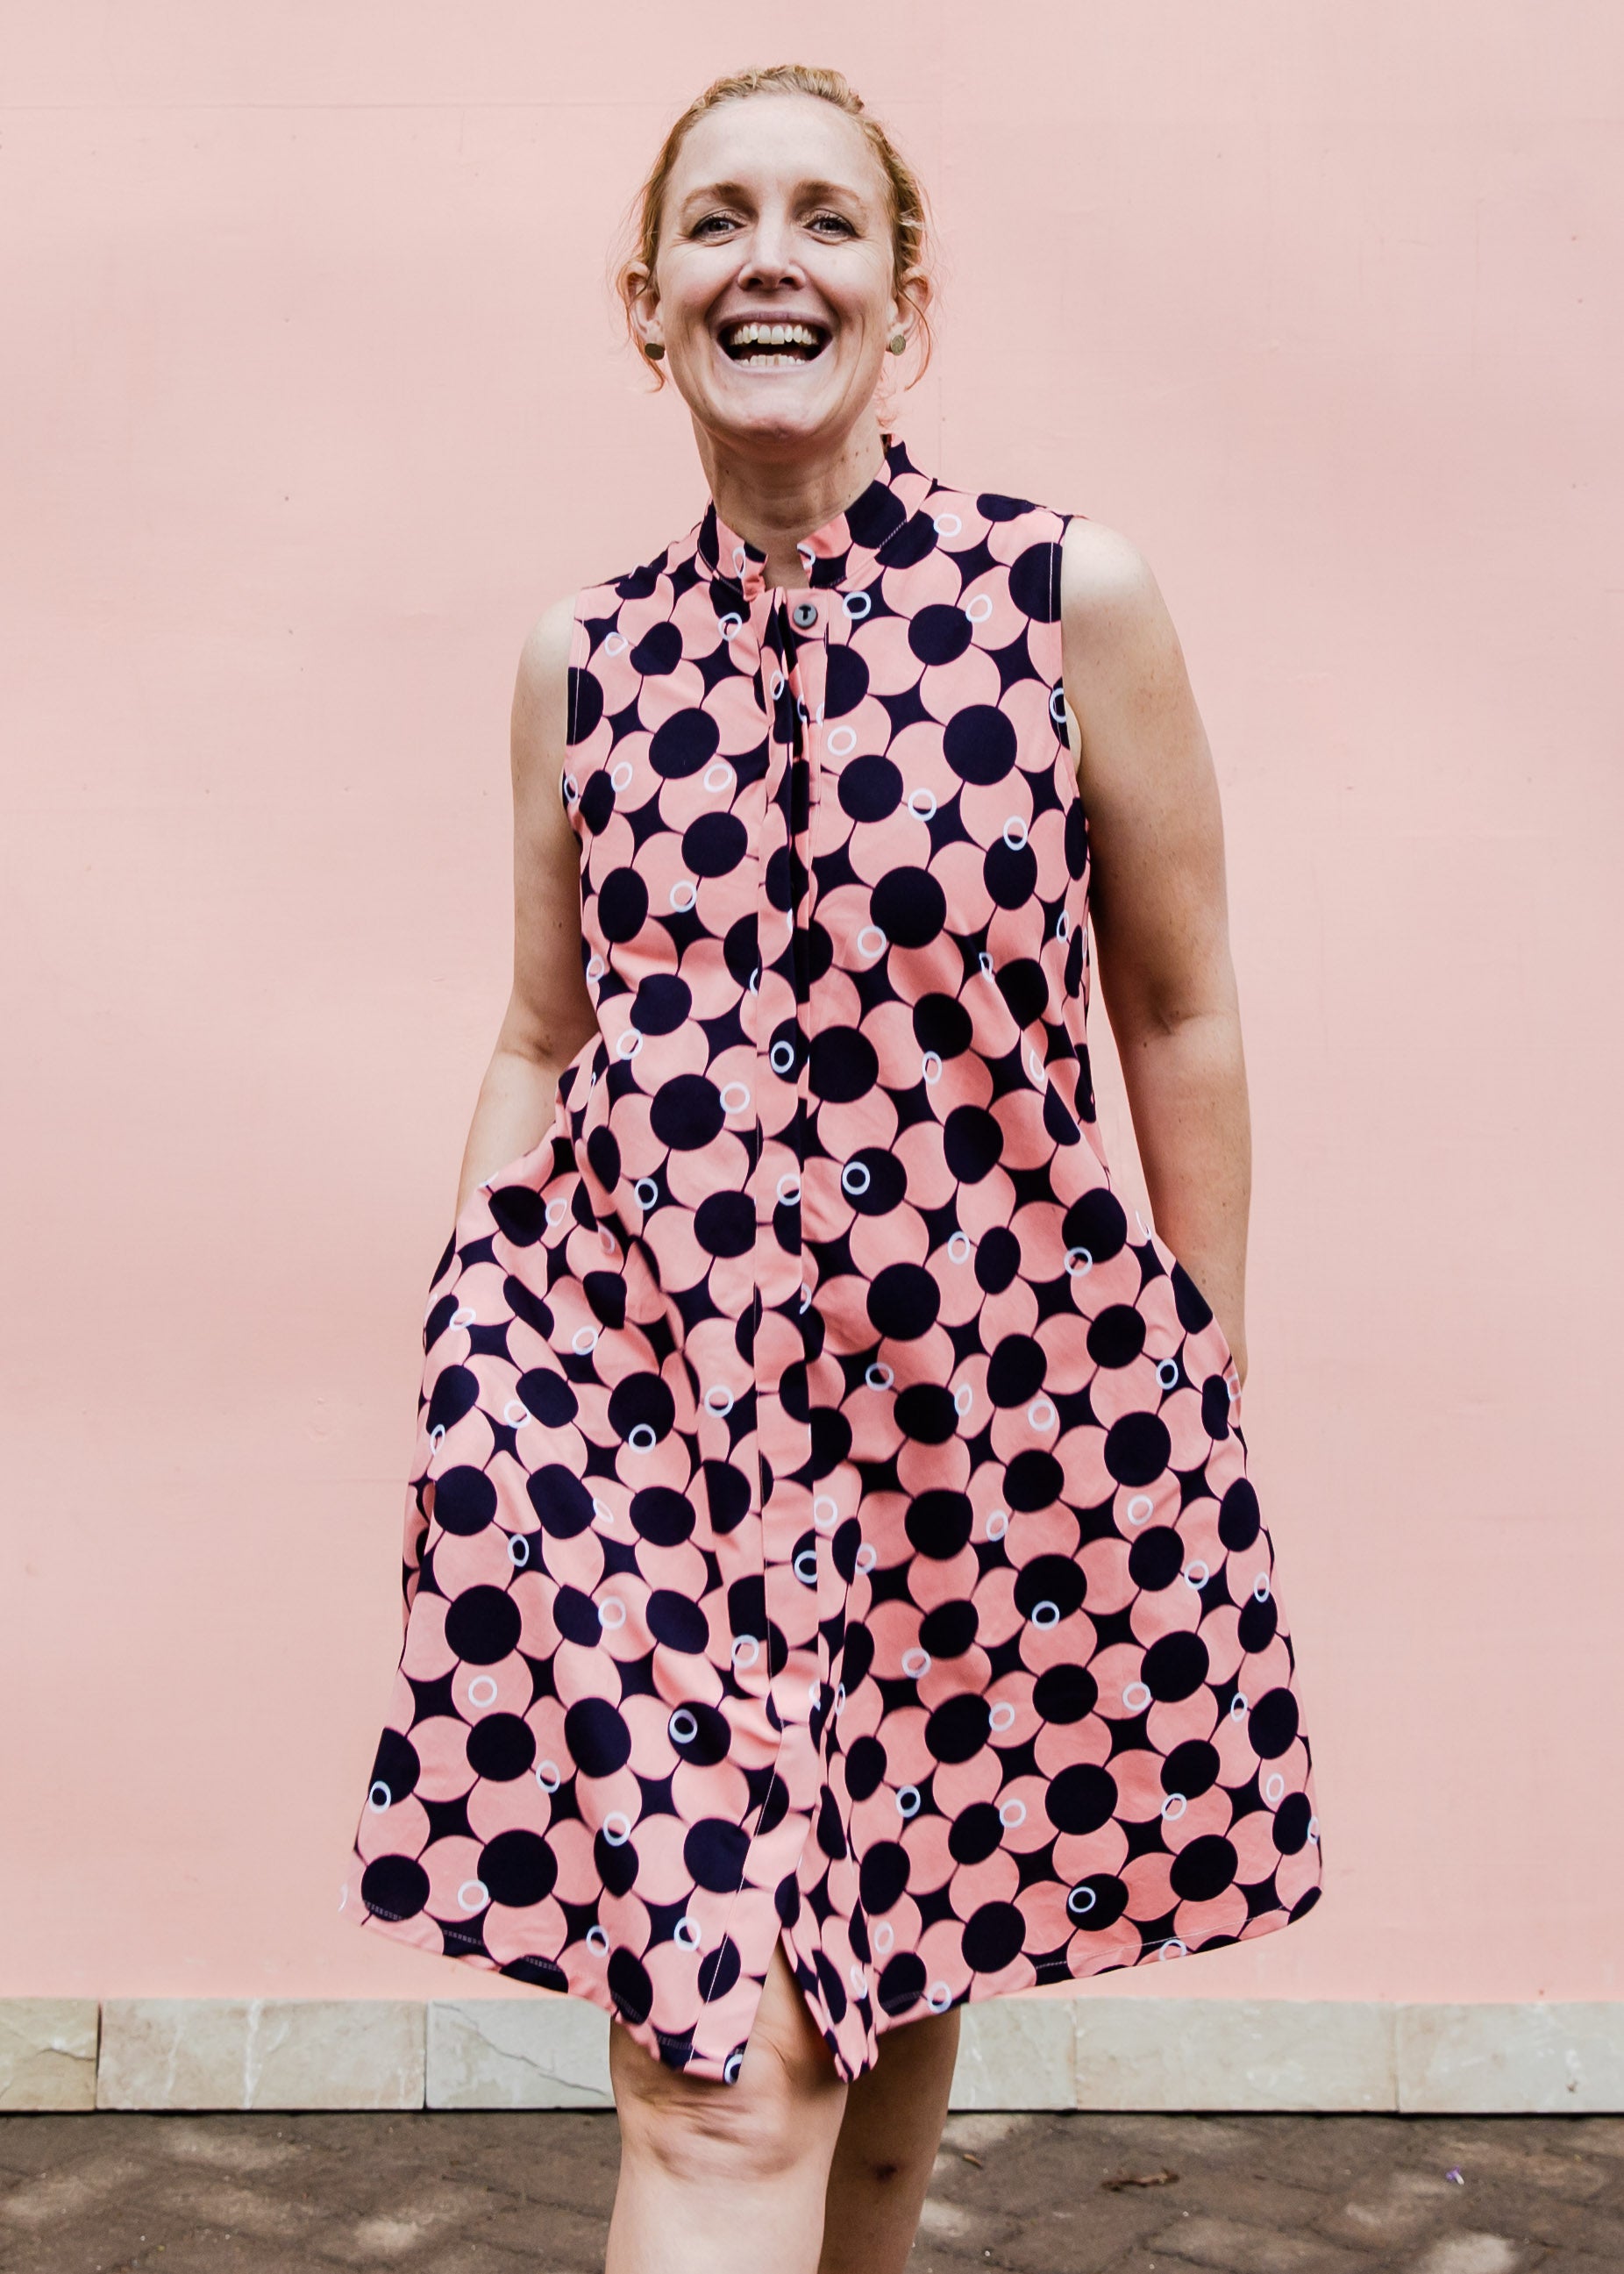 Pink dress with black and white dots